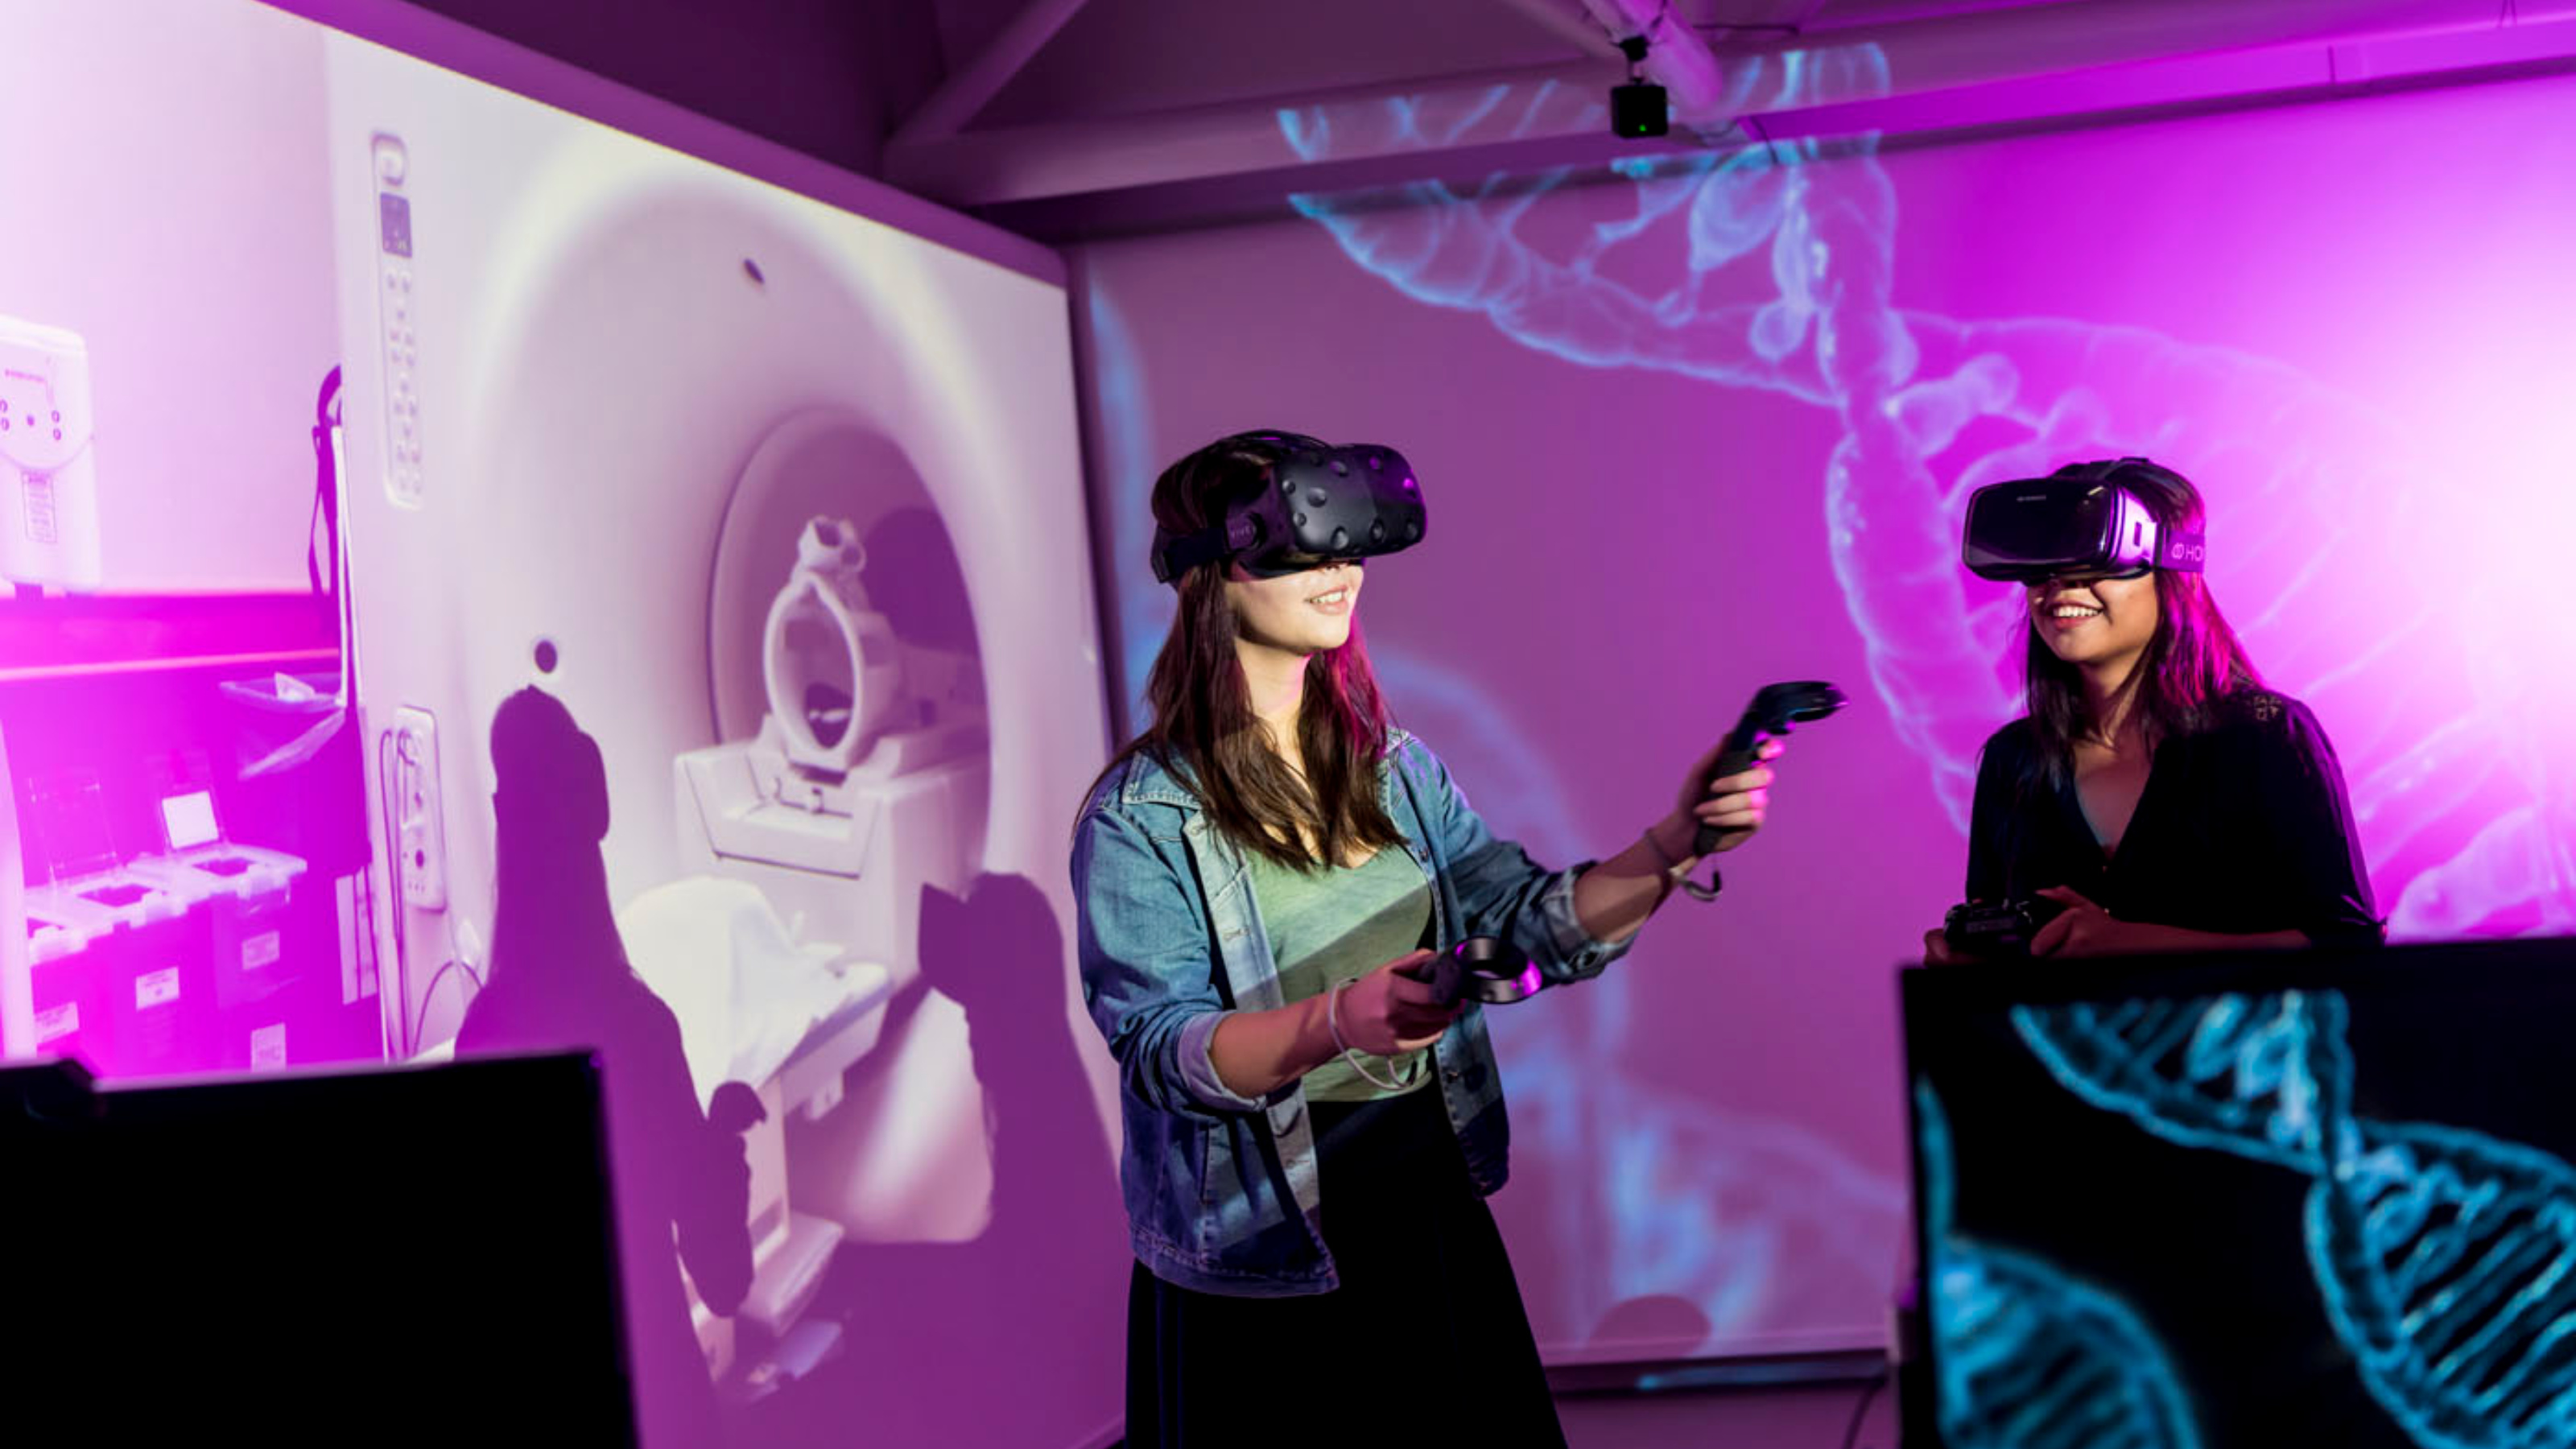 Two women using Virtual Reality headsets in front of a projected image of DNA helices and an MRI machine